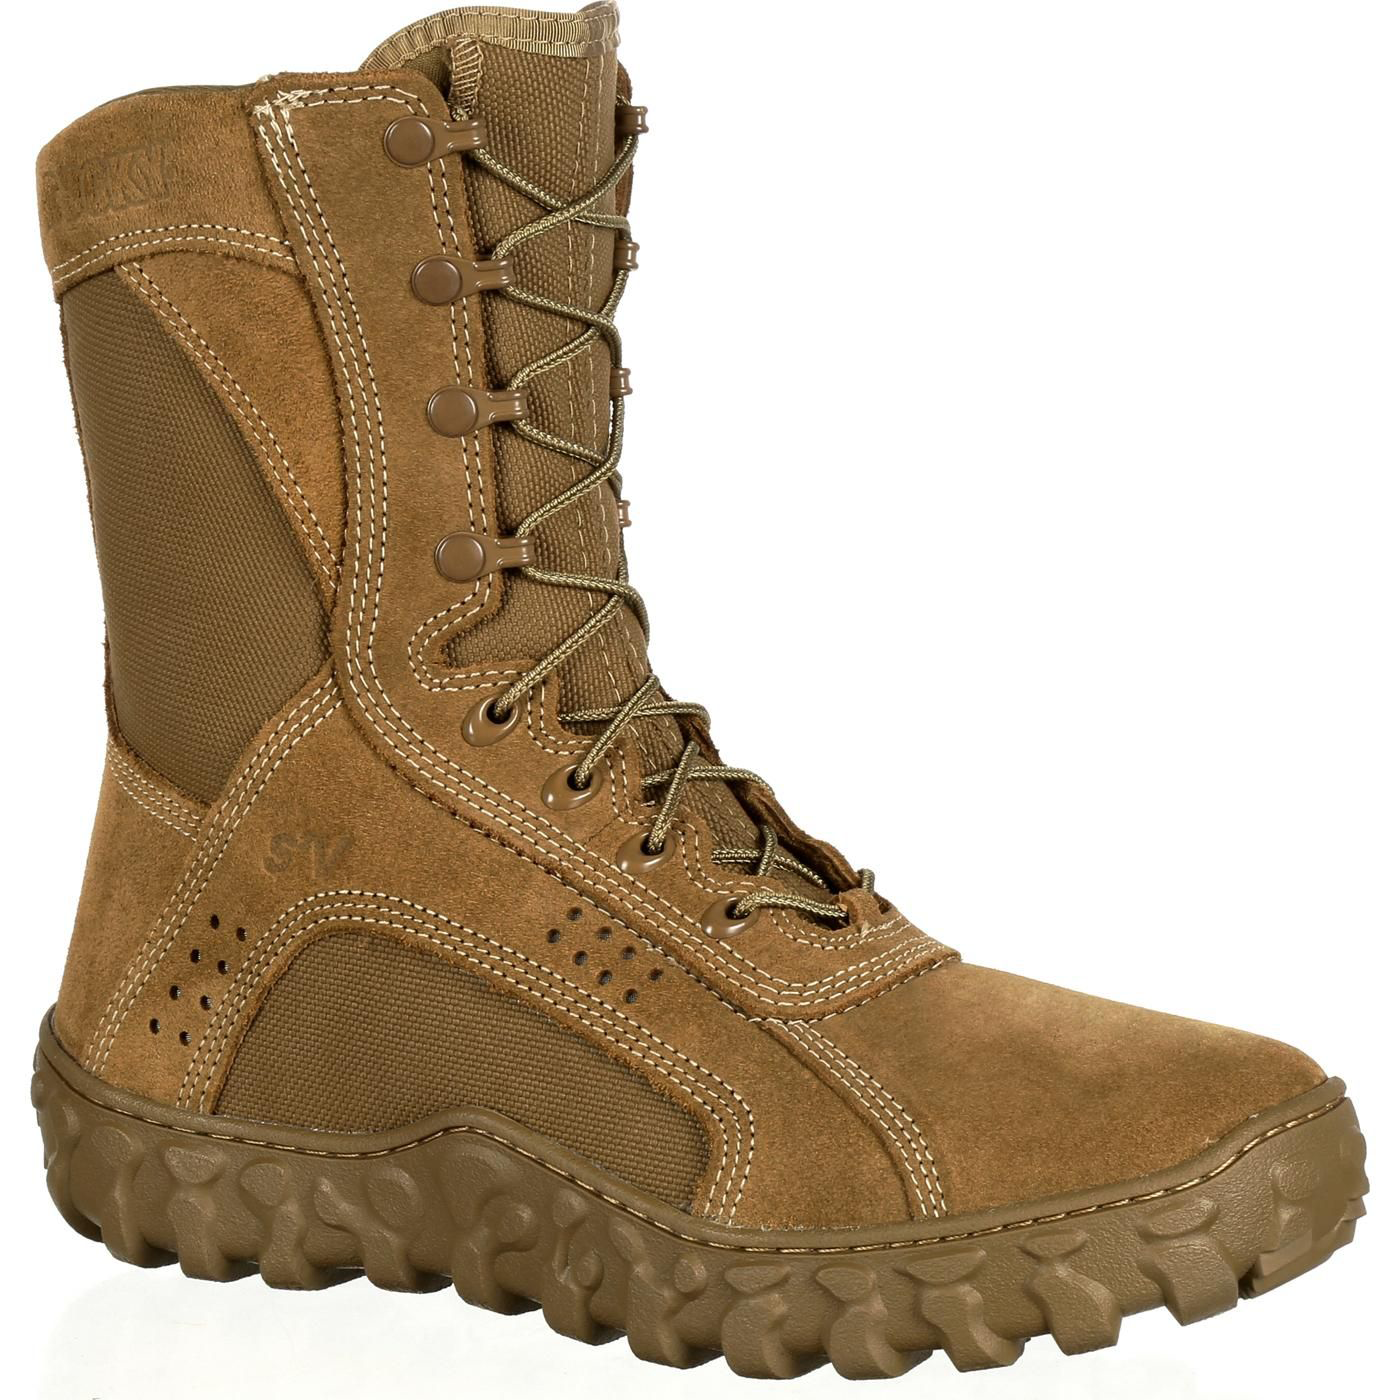 Rocky S2V Tactical Military Boots for Men - Coyote Brown - 14W